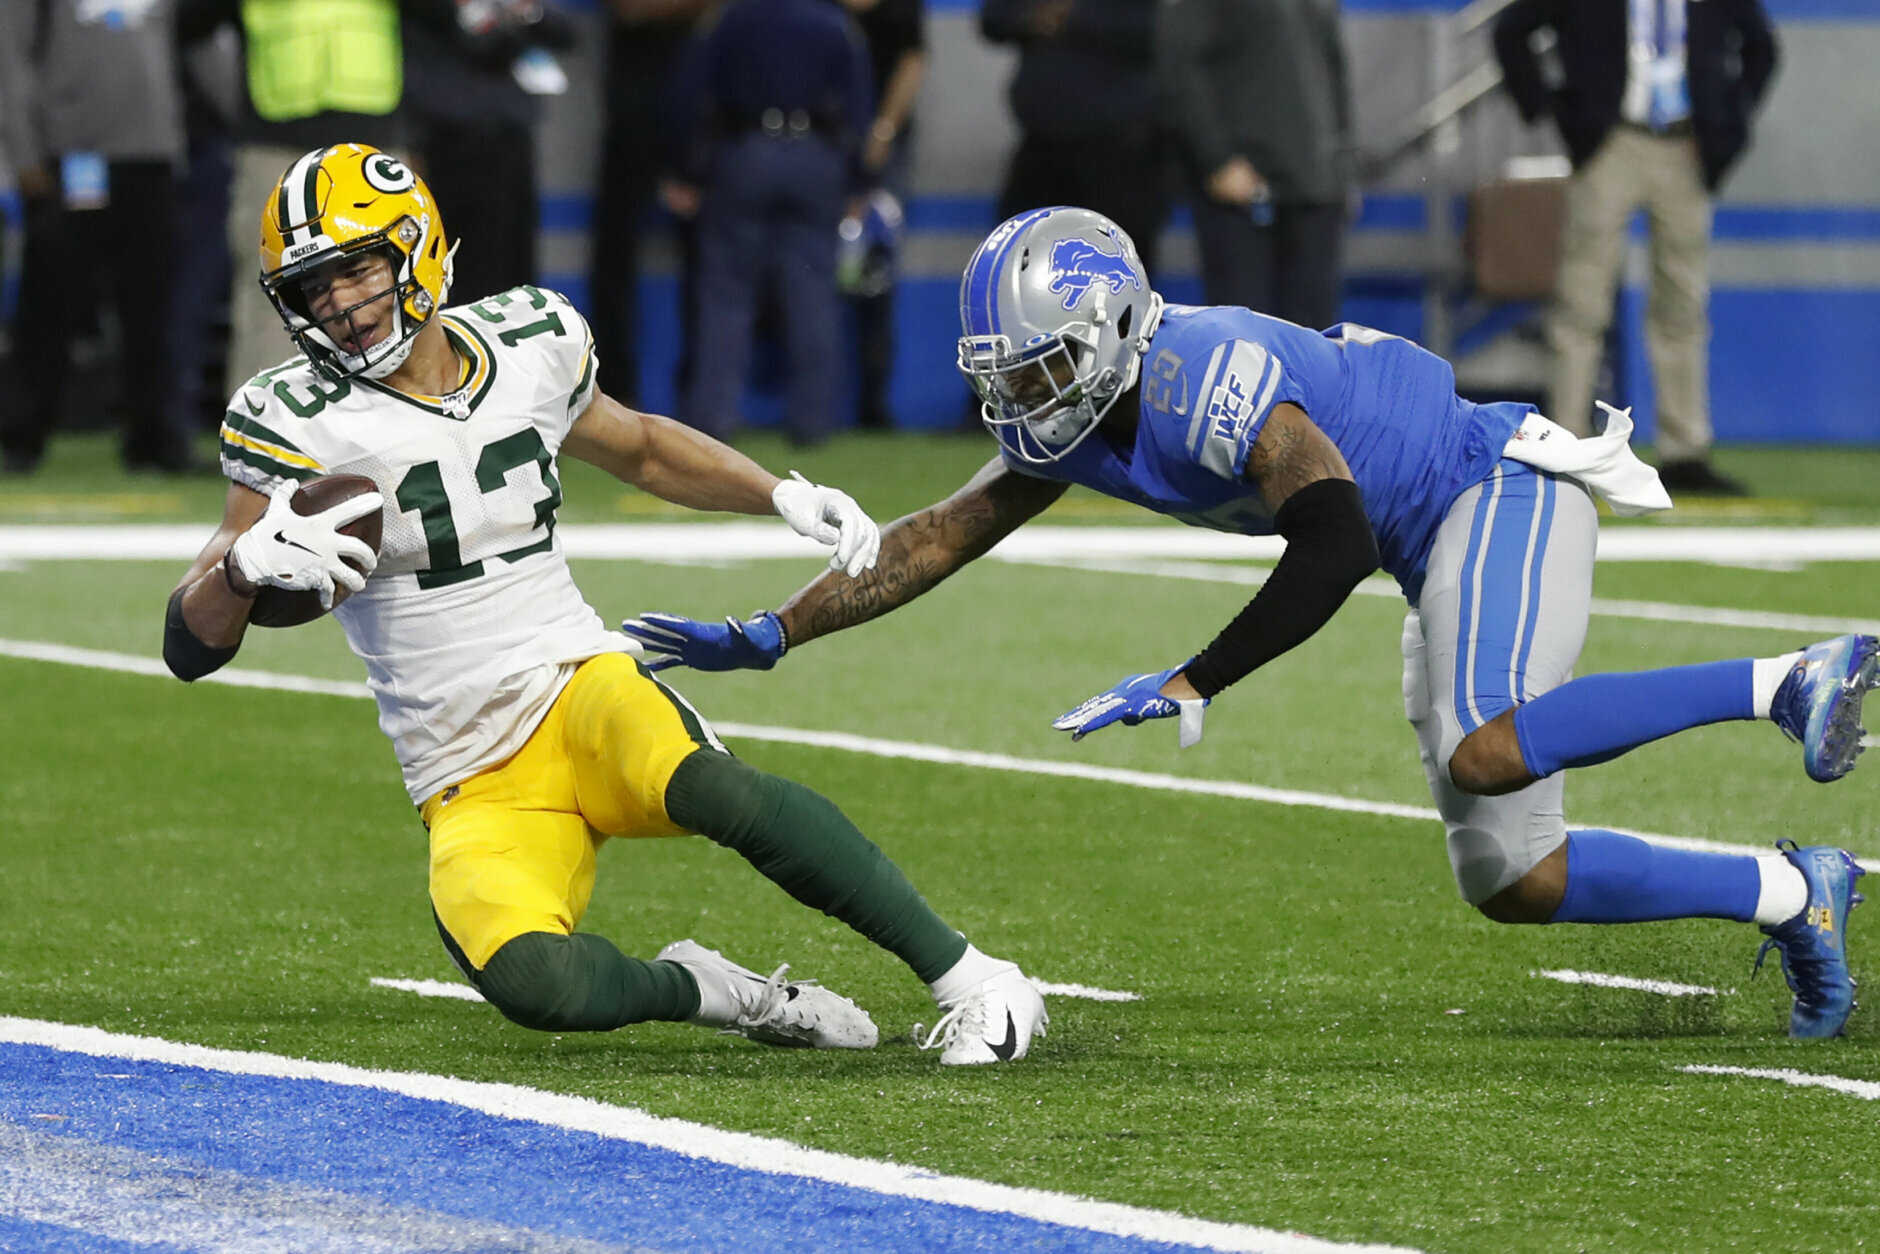 <p><b><i>Packers 23</i></b><br />
<b><i>Lions 20</i></b></p>
<p>Green Bay survived a scare to lock up a first-round bye, and Detroit seems destined to say bye-bye to Matt Patricia. Is it possible for a team already <a href="https://www.freep.com/story/sports/nfl/lions/2017/09/06/detroit-lions-curse-of-bobby-layne-1957-championship/629831001/" target="_blank" rel="noopener">cursed by Bobby Layne</a> to be double-cursed for firing <a href="https://www.si.com/nfl/lions/news/dear-jim-caldwell-im-sorry" target="_blank" rel="noopener">the underrated Jim Caldwell</a>?</p>
